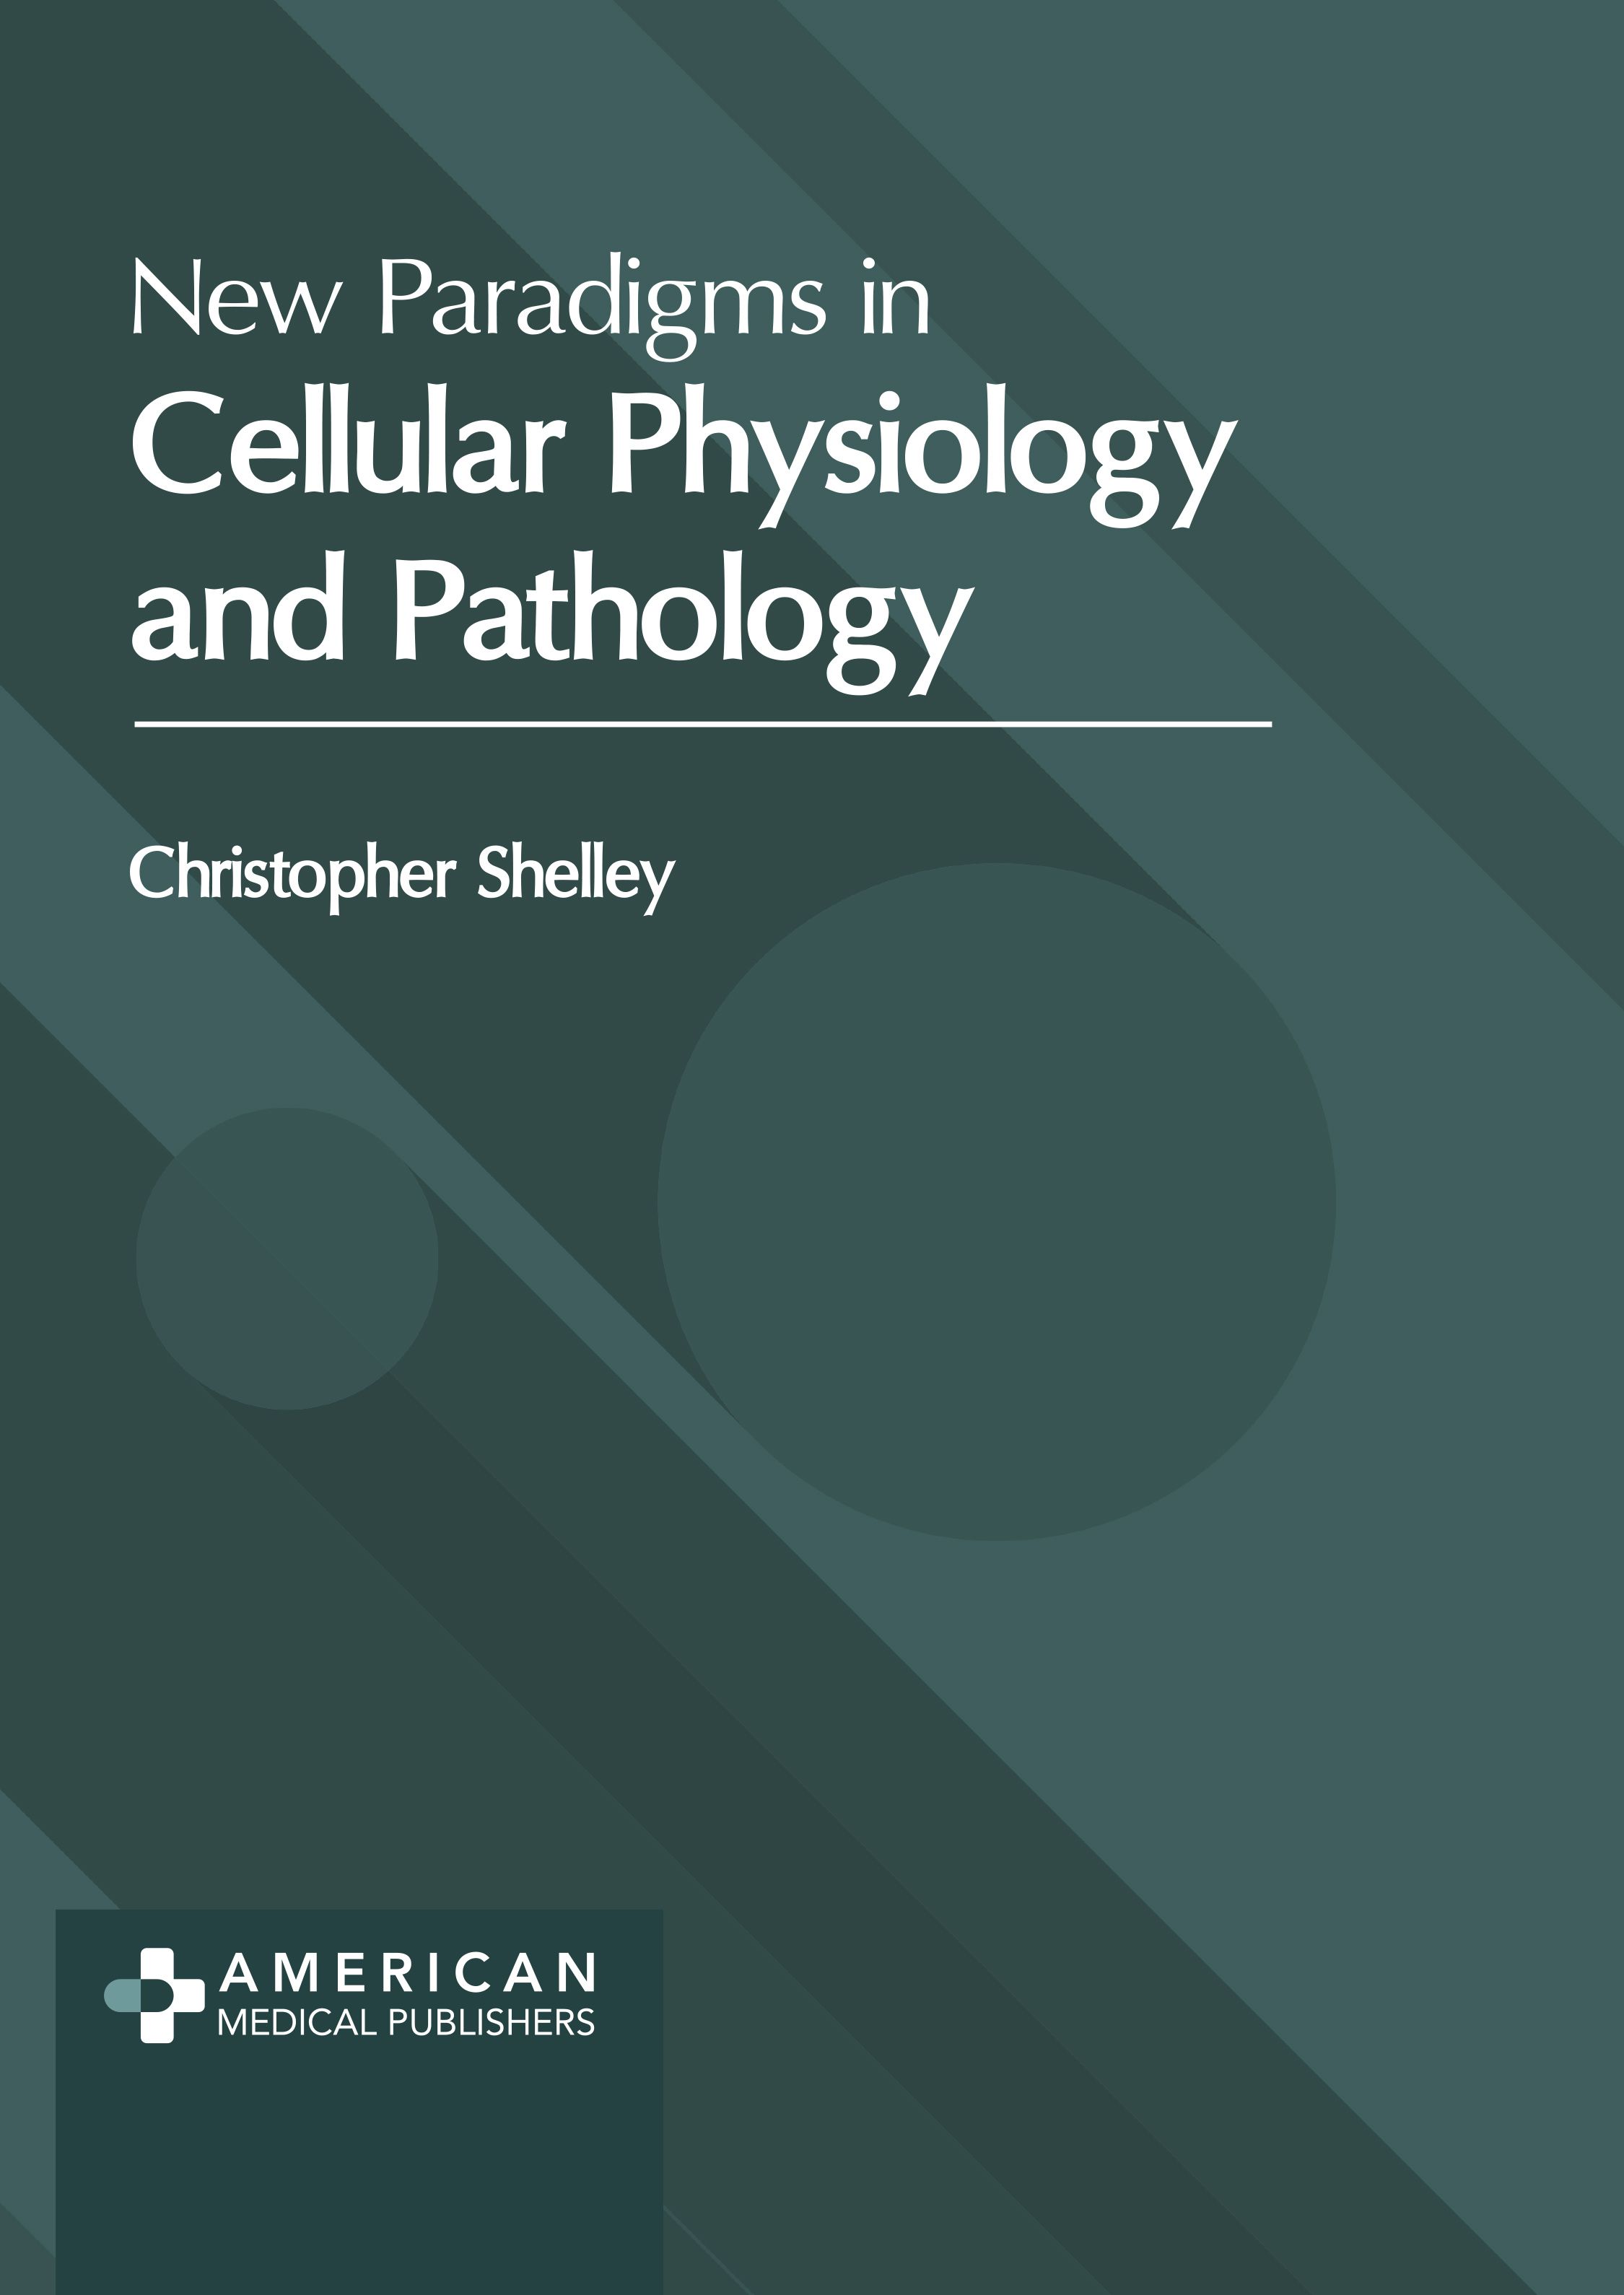 exclusive-publishers/american-medical-publishers/new-paradigms-in-cellular-physiology-and-pathology-9798887403335